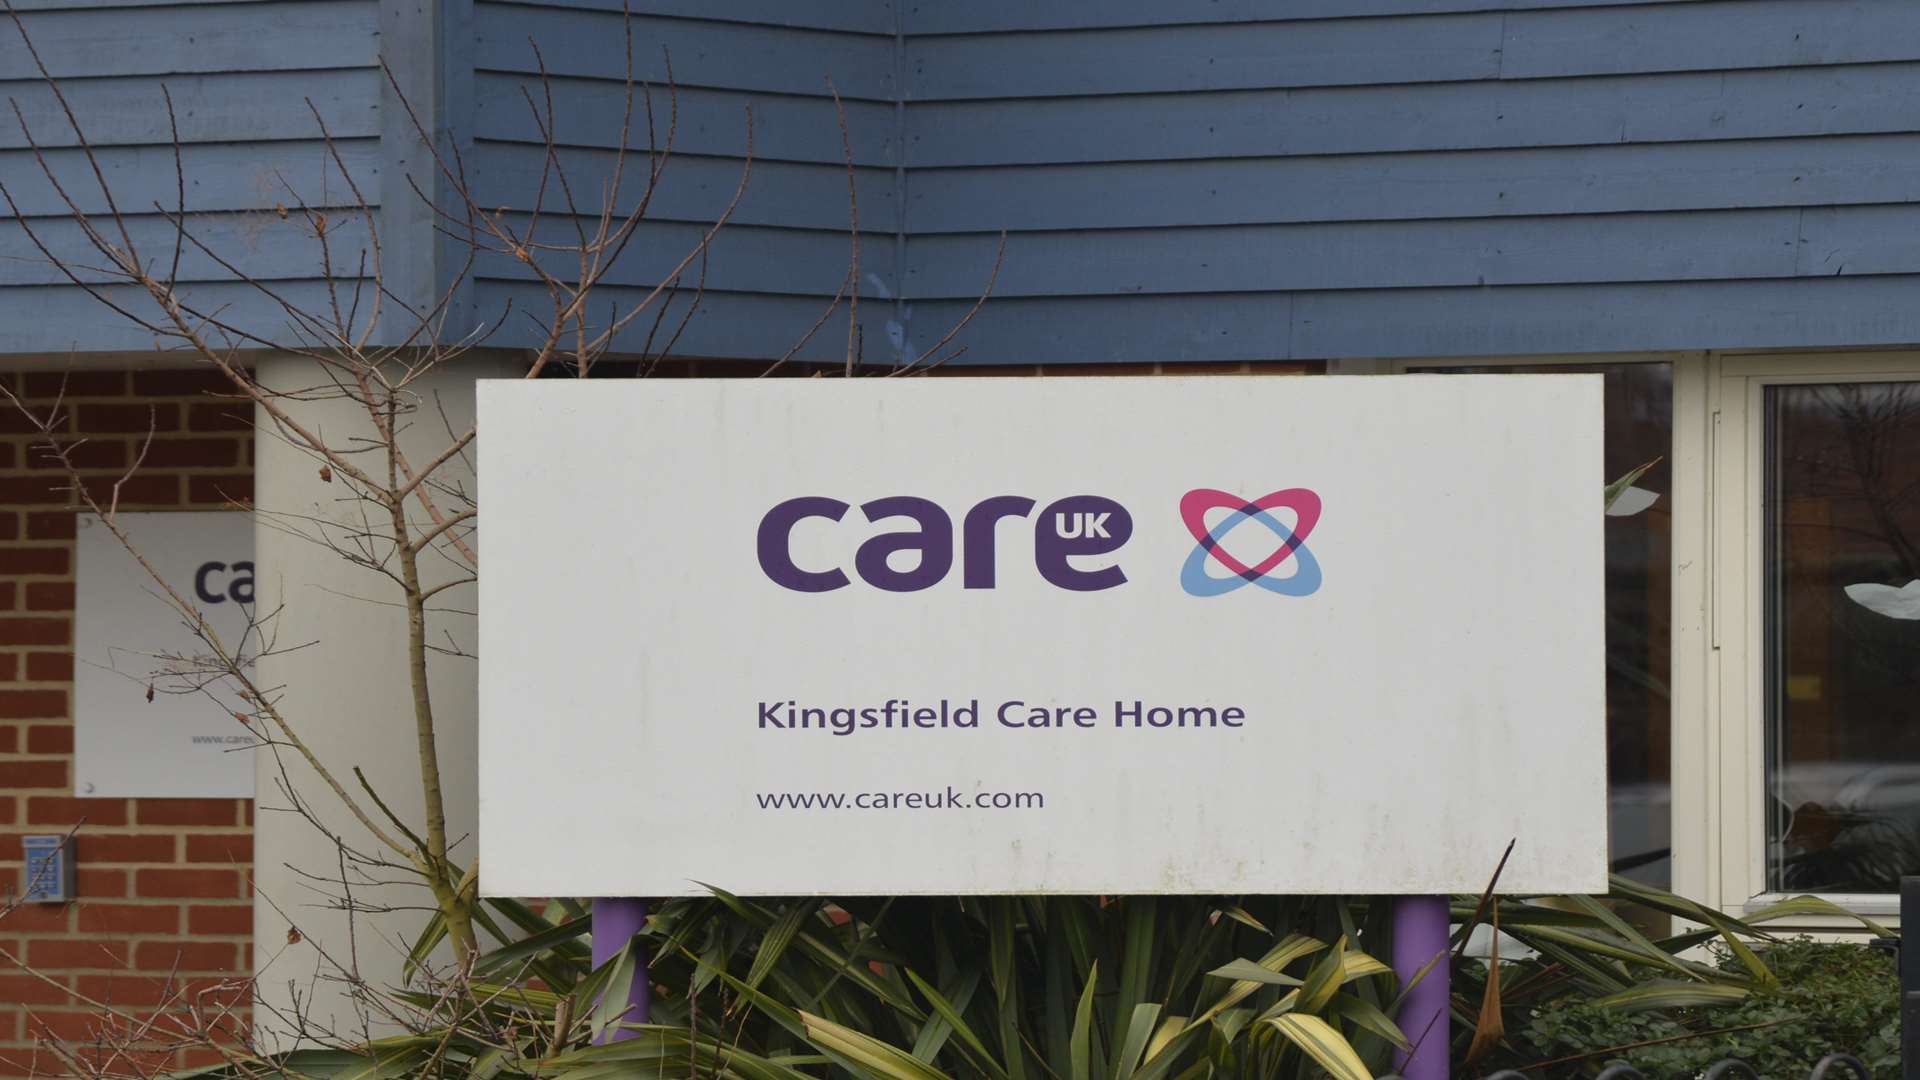 The alleged attempted murder was at the Kingsfield Care Home